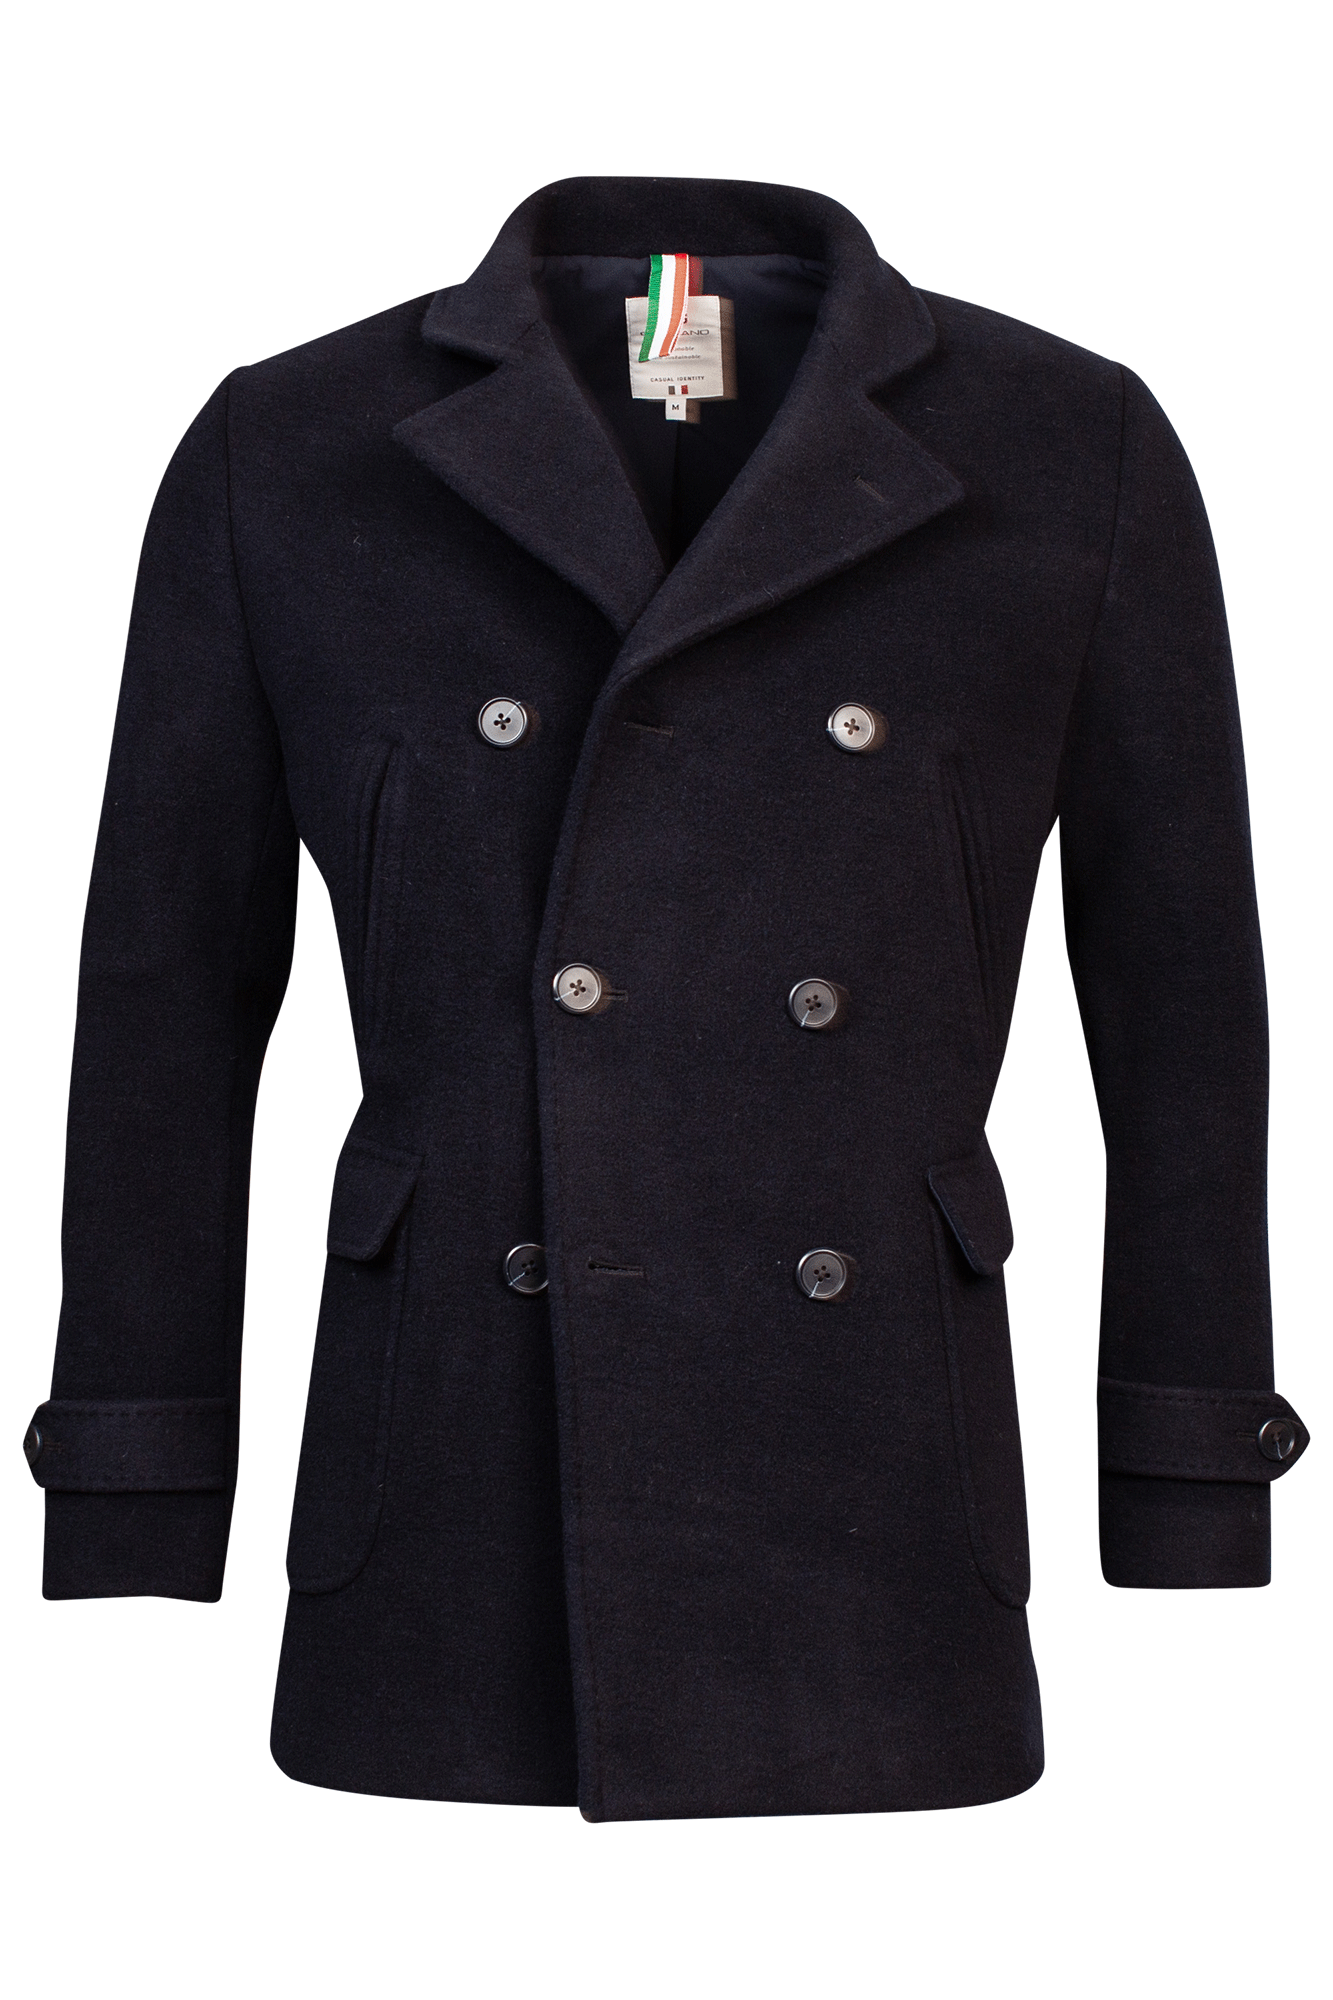 Double breasted coat in navy by Giordano